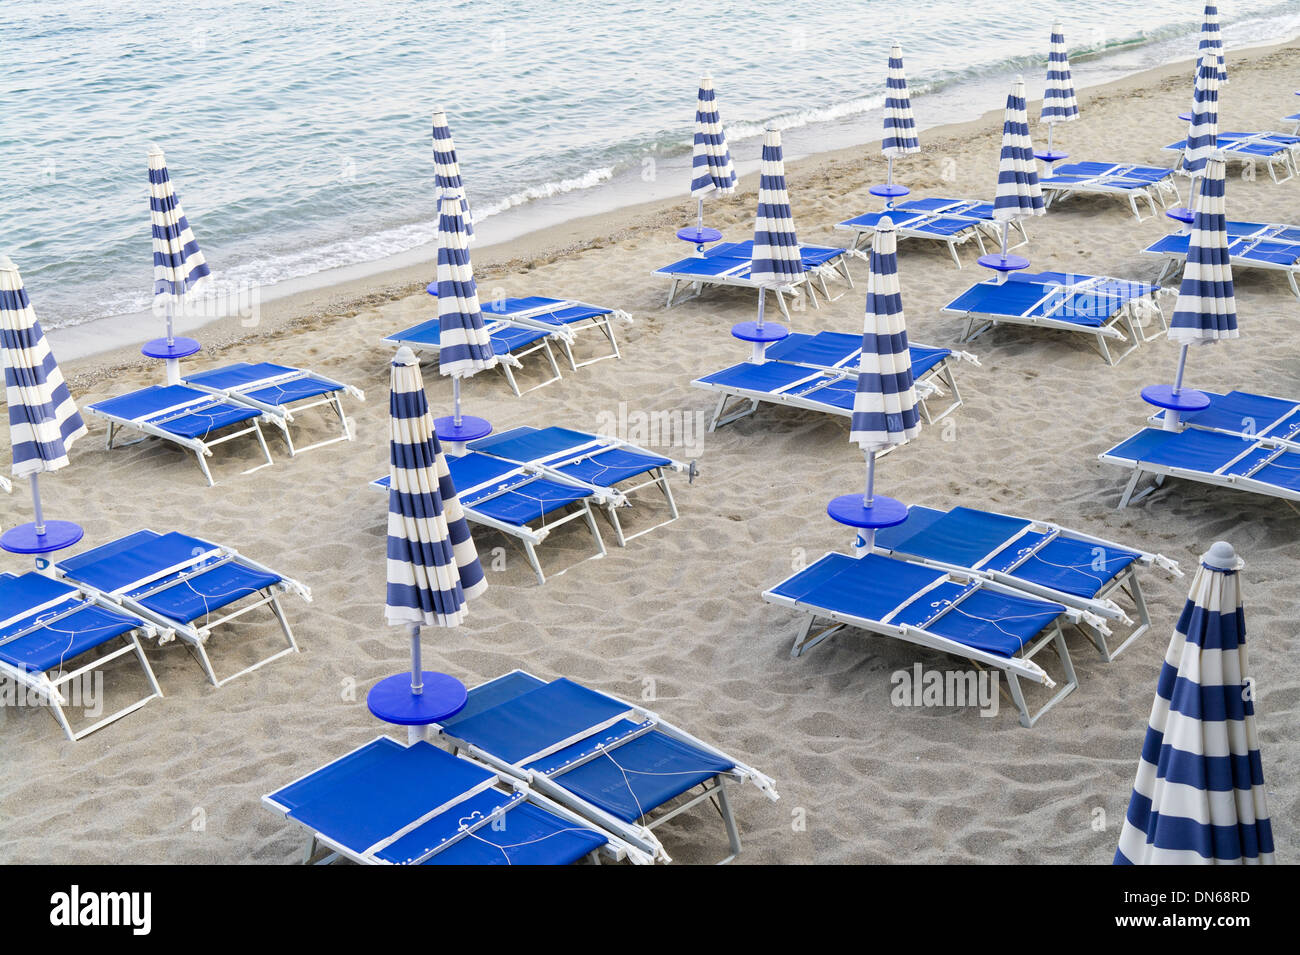 Sunloungers on empty lido beach folded up at the end of the day. Stock Photo